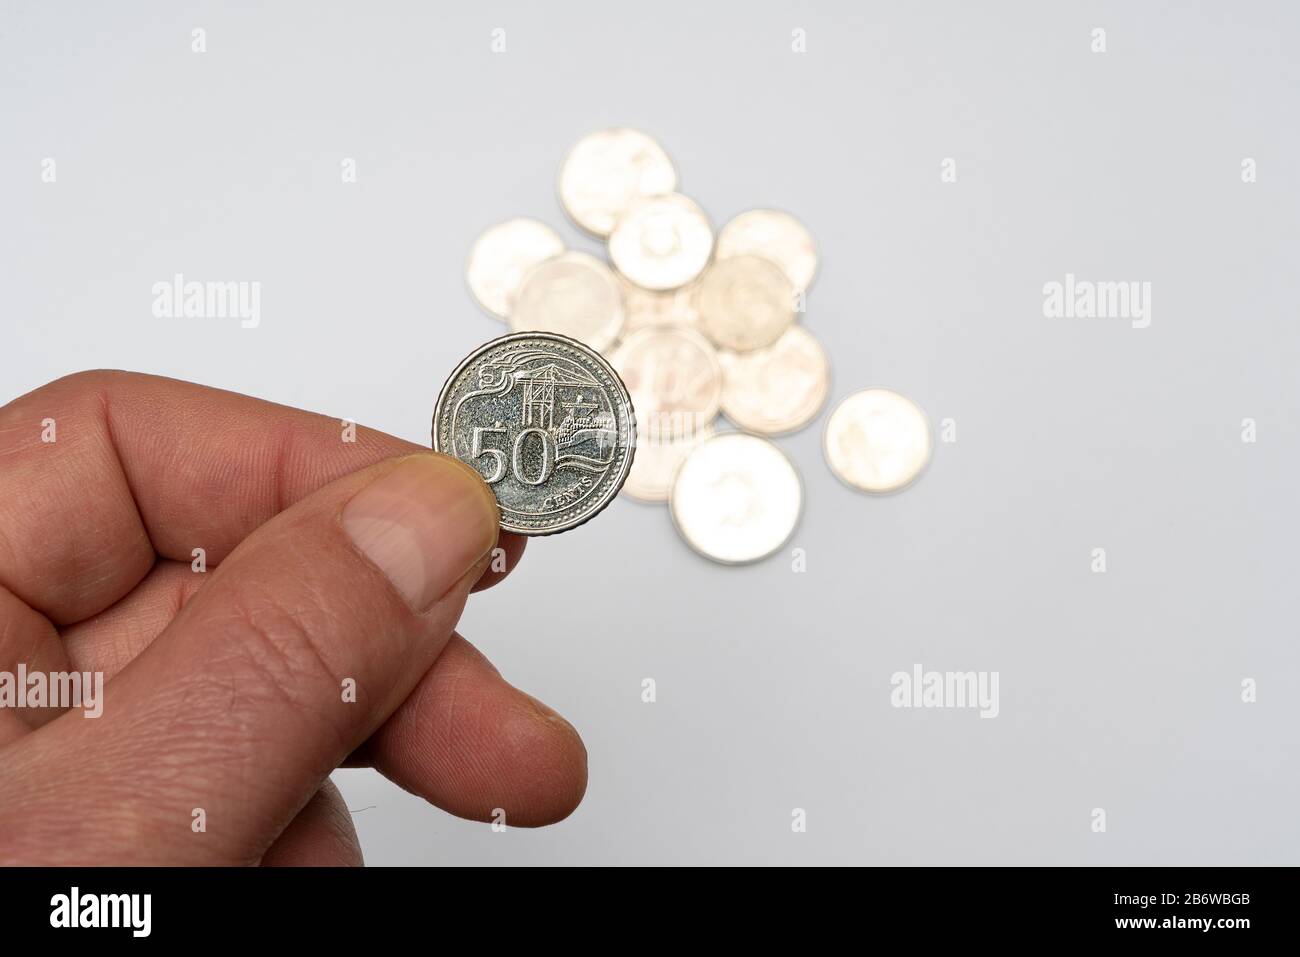 A 50 cents of Singaporean dollar coin on a white surface Stock Photo